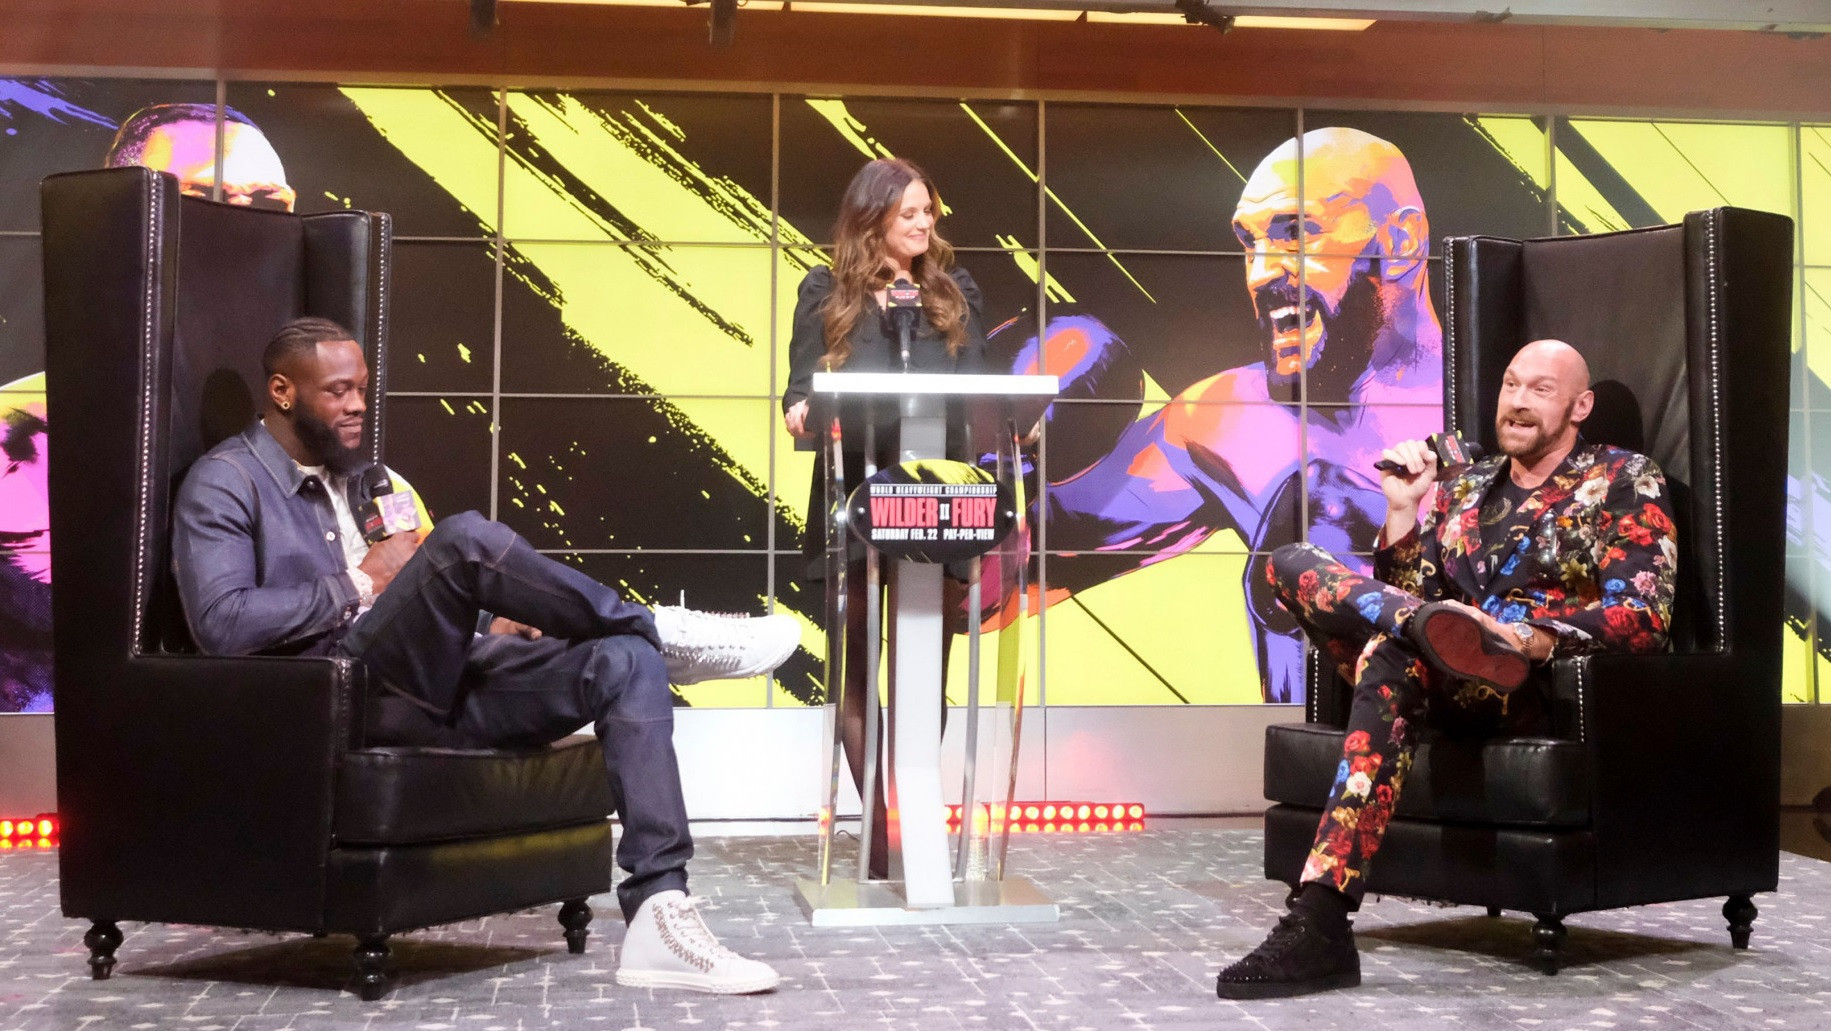 Deontay Wilder and Tyson Fury go head-to-head at a TV event ahead of their heavyweight fight earlier this year - ©AFP